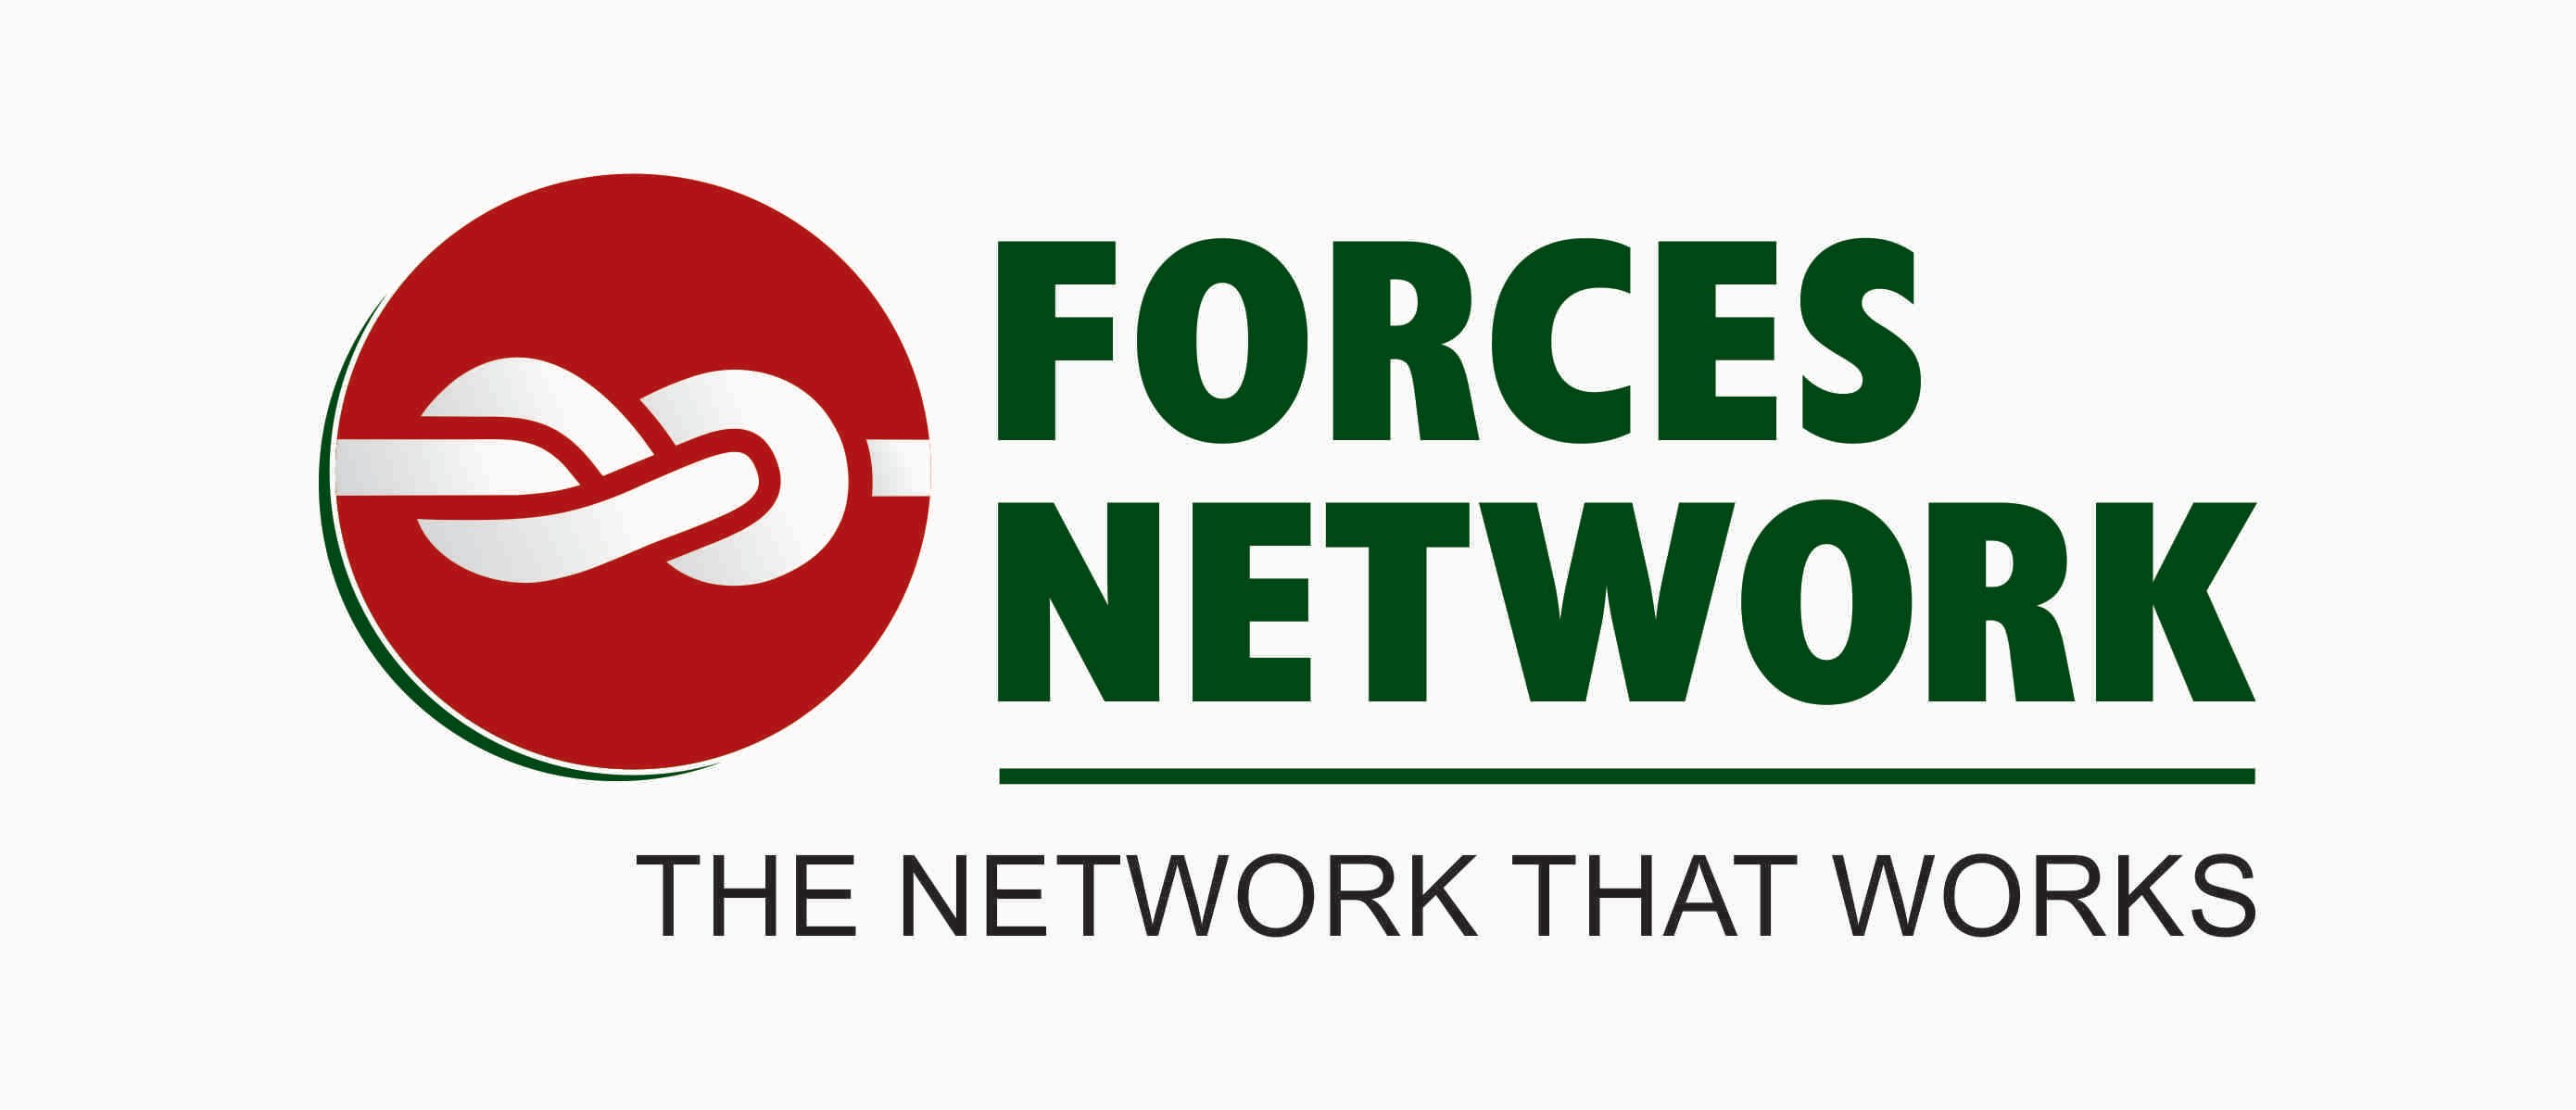 Forces Network is the Network of  military veterans in corporate, helping in a smooth transition to a civilian life as well as building a professional Network